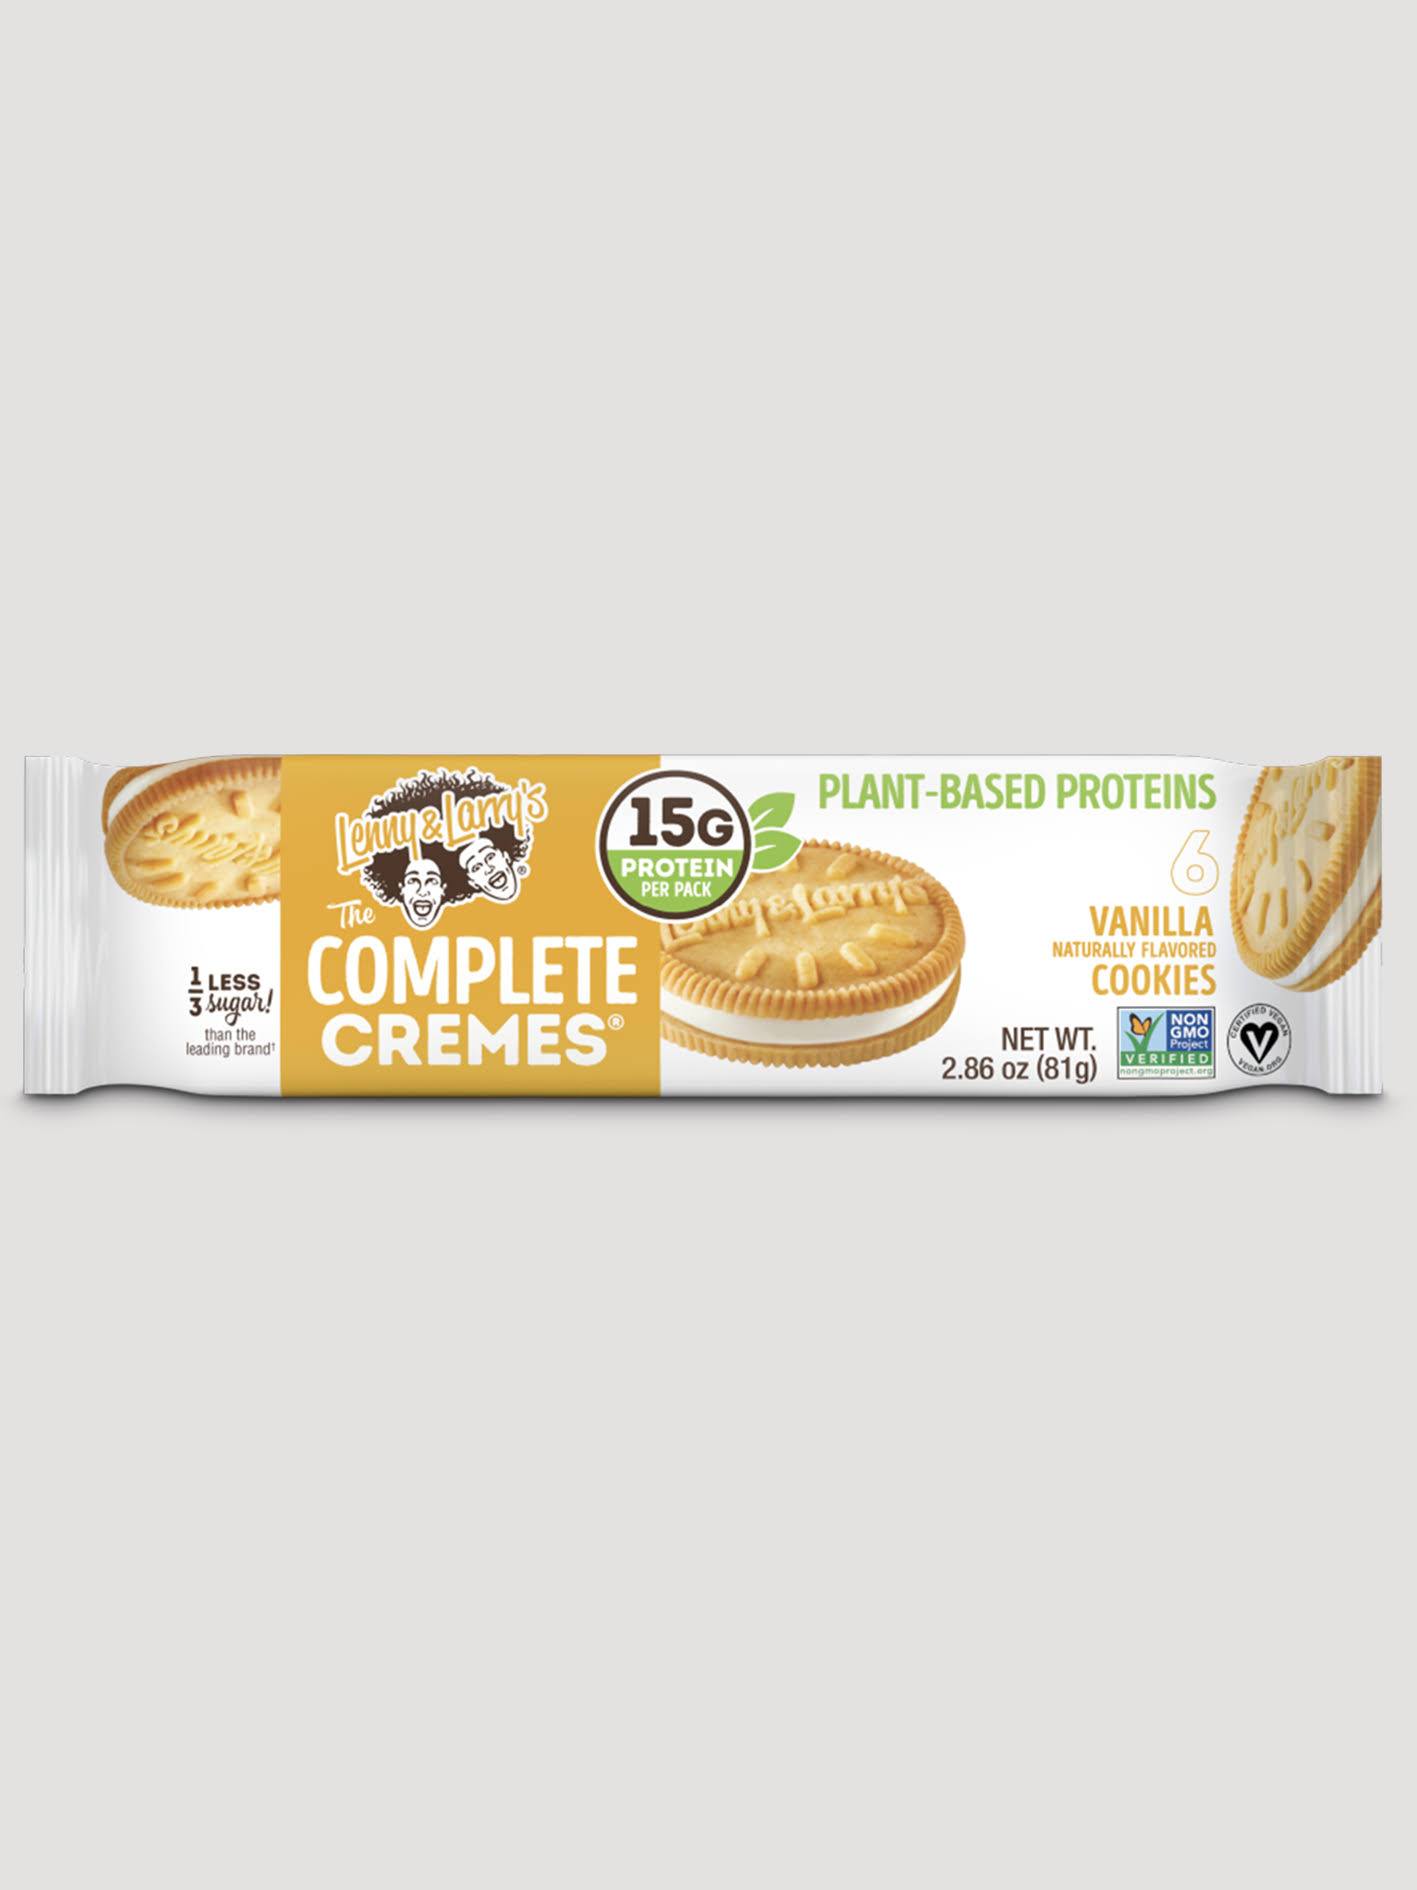 Lenny & Larry's The Complete Cremes Cookies, Plant-Based Proteins, Vanilla - 6 cookies, 2.86 oz